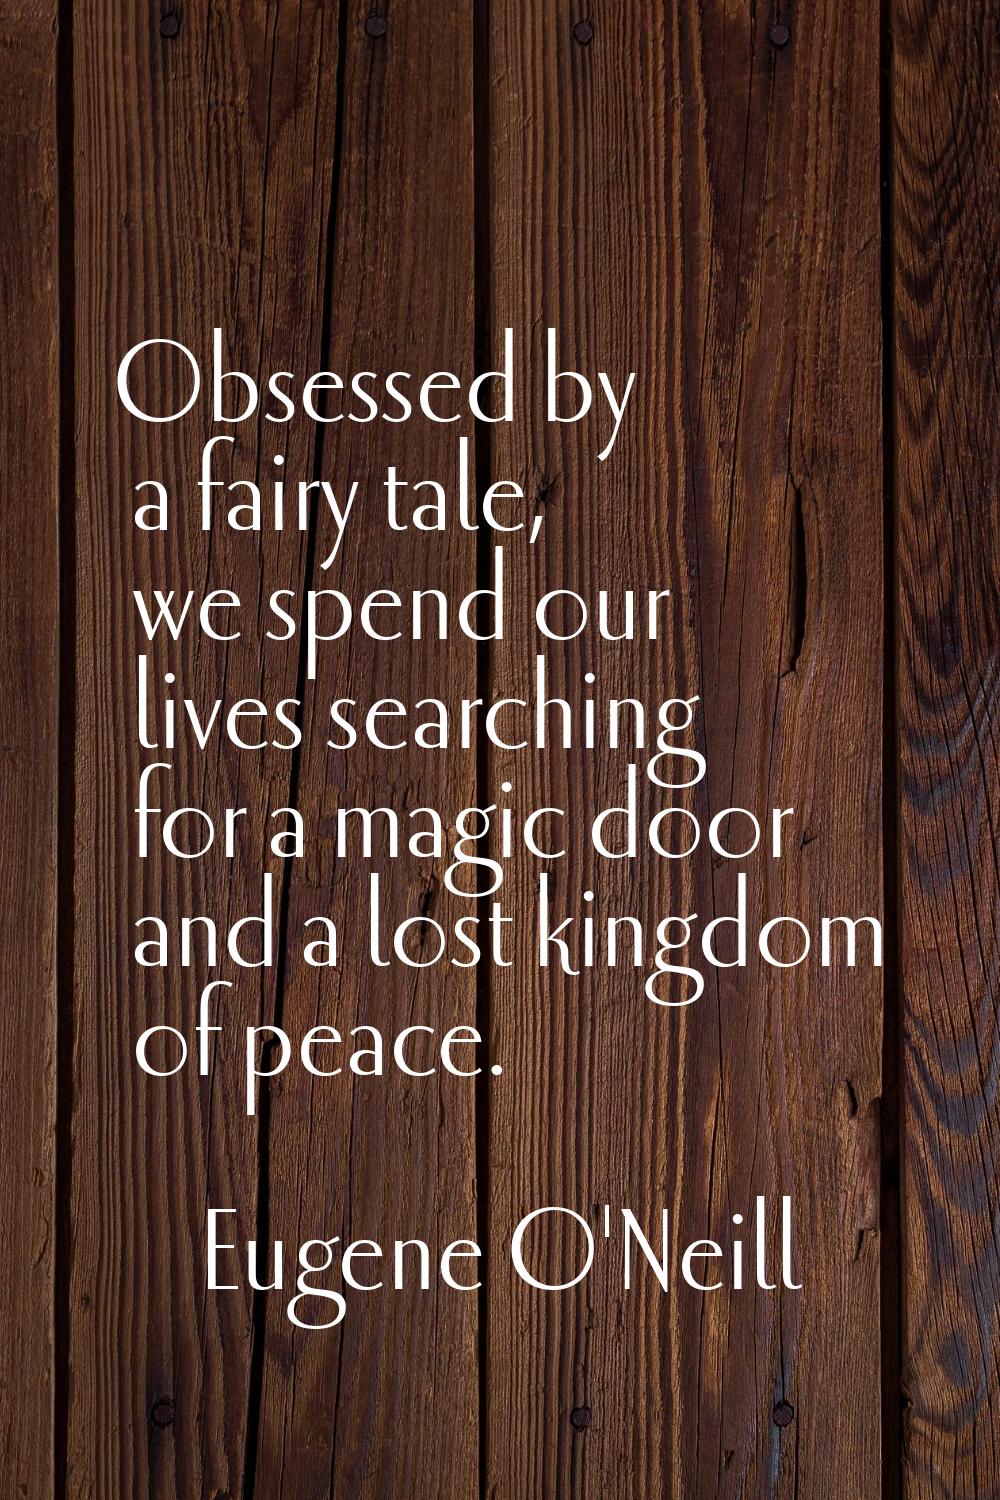 Obsessed by a fairy tale, we spend our lives searching for a magic door and a lost kingdom of peace